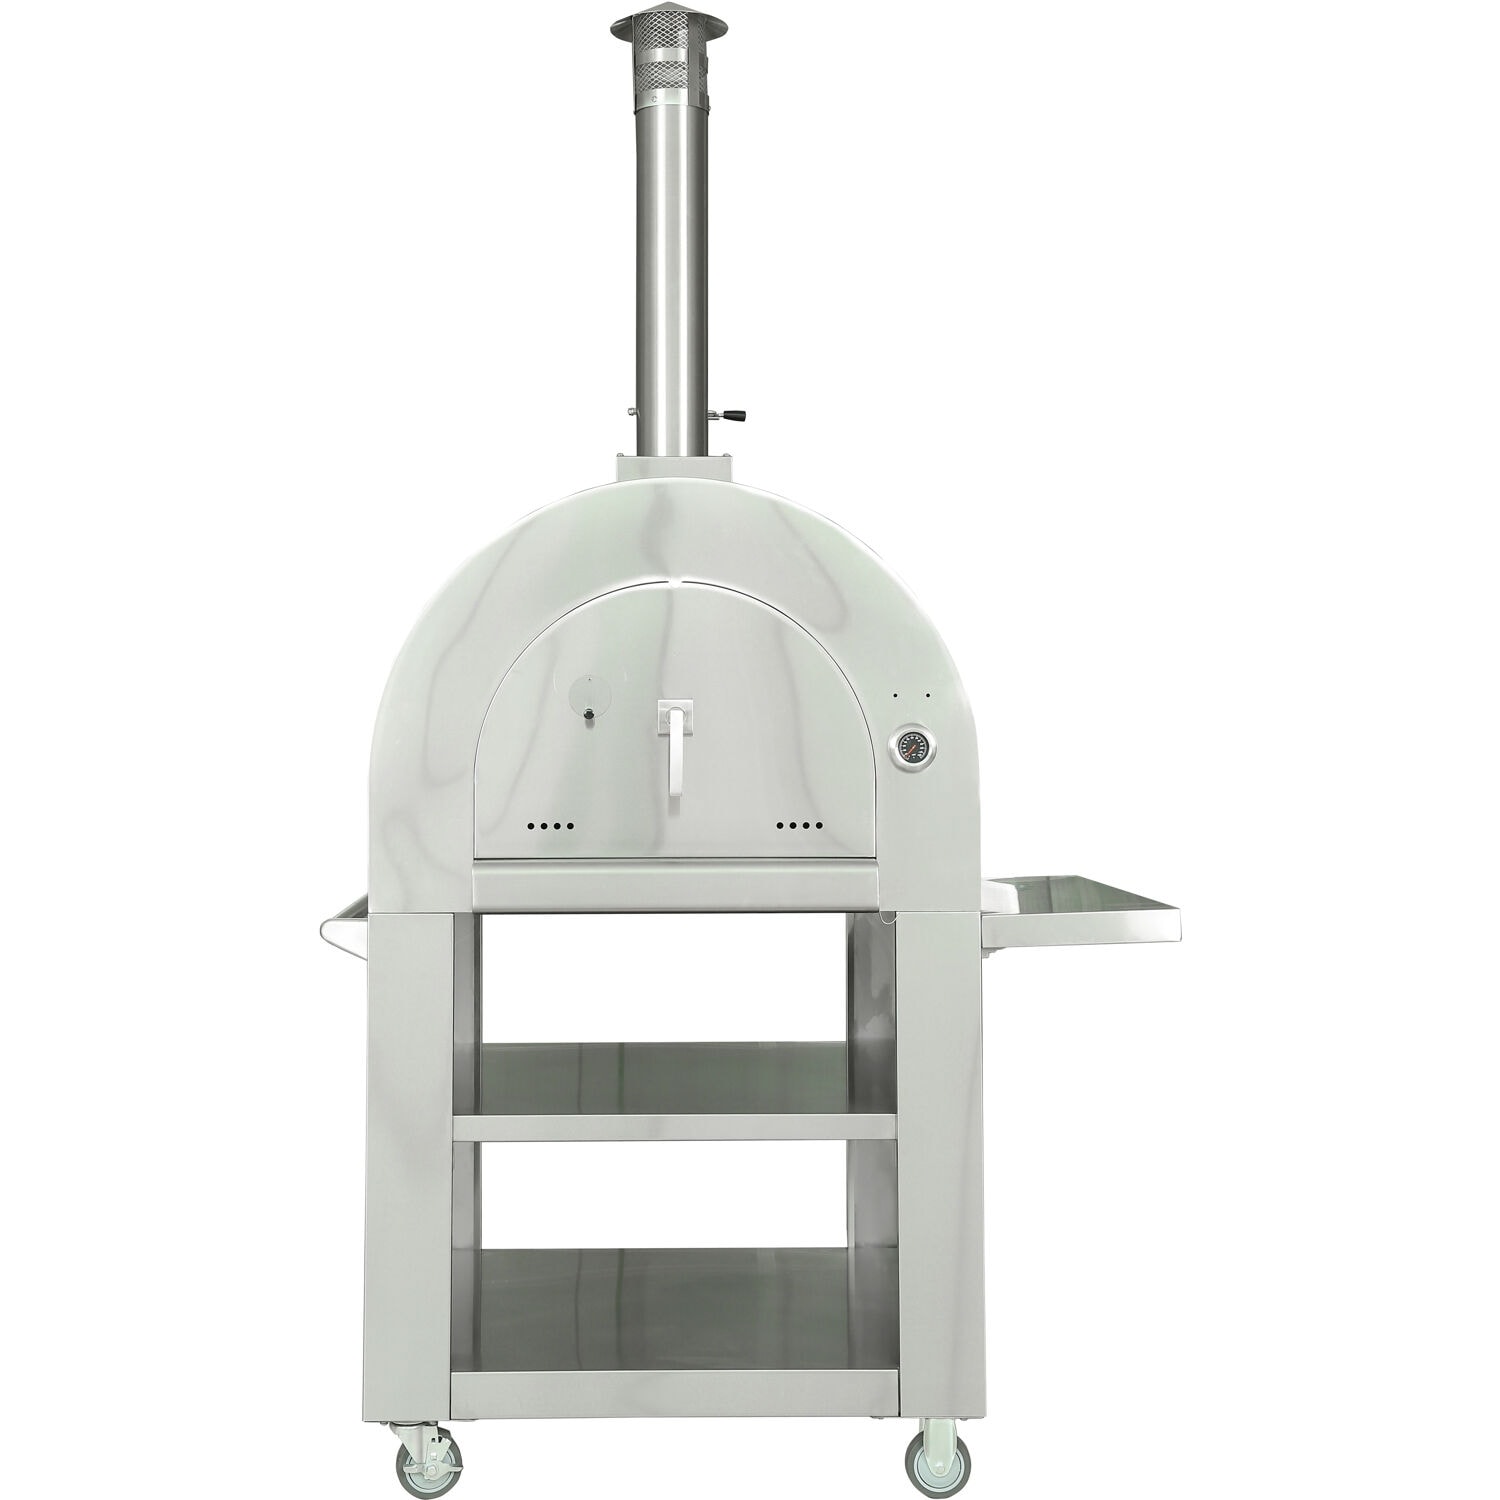 https://ak1.ostkcdn.com/images/products/is/images/direct/997e9739f18c2c9a16bf93b674948326227b3cb0/Hanover-Portable-Wood-Fired-Pizza-Oven-in-Stainless-Steel.jpg